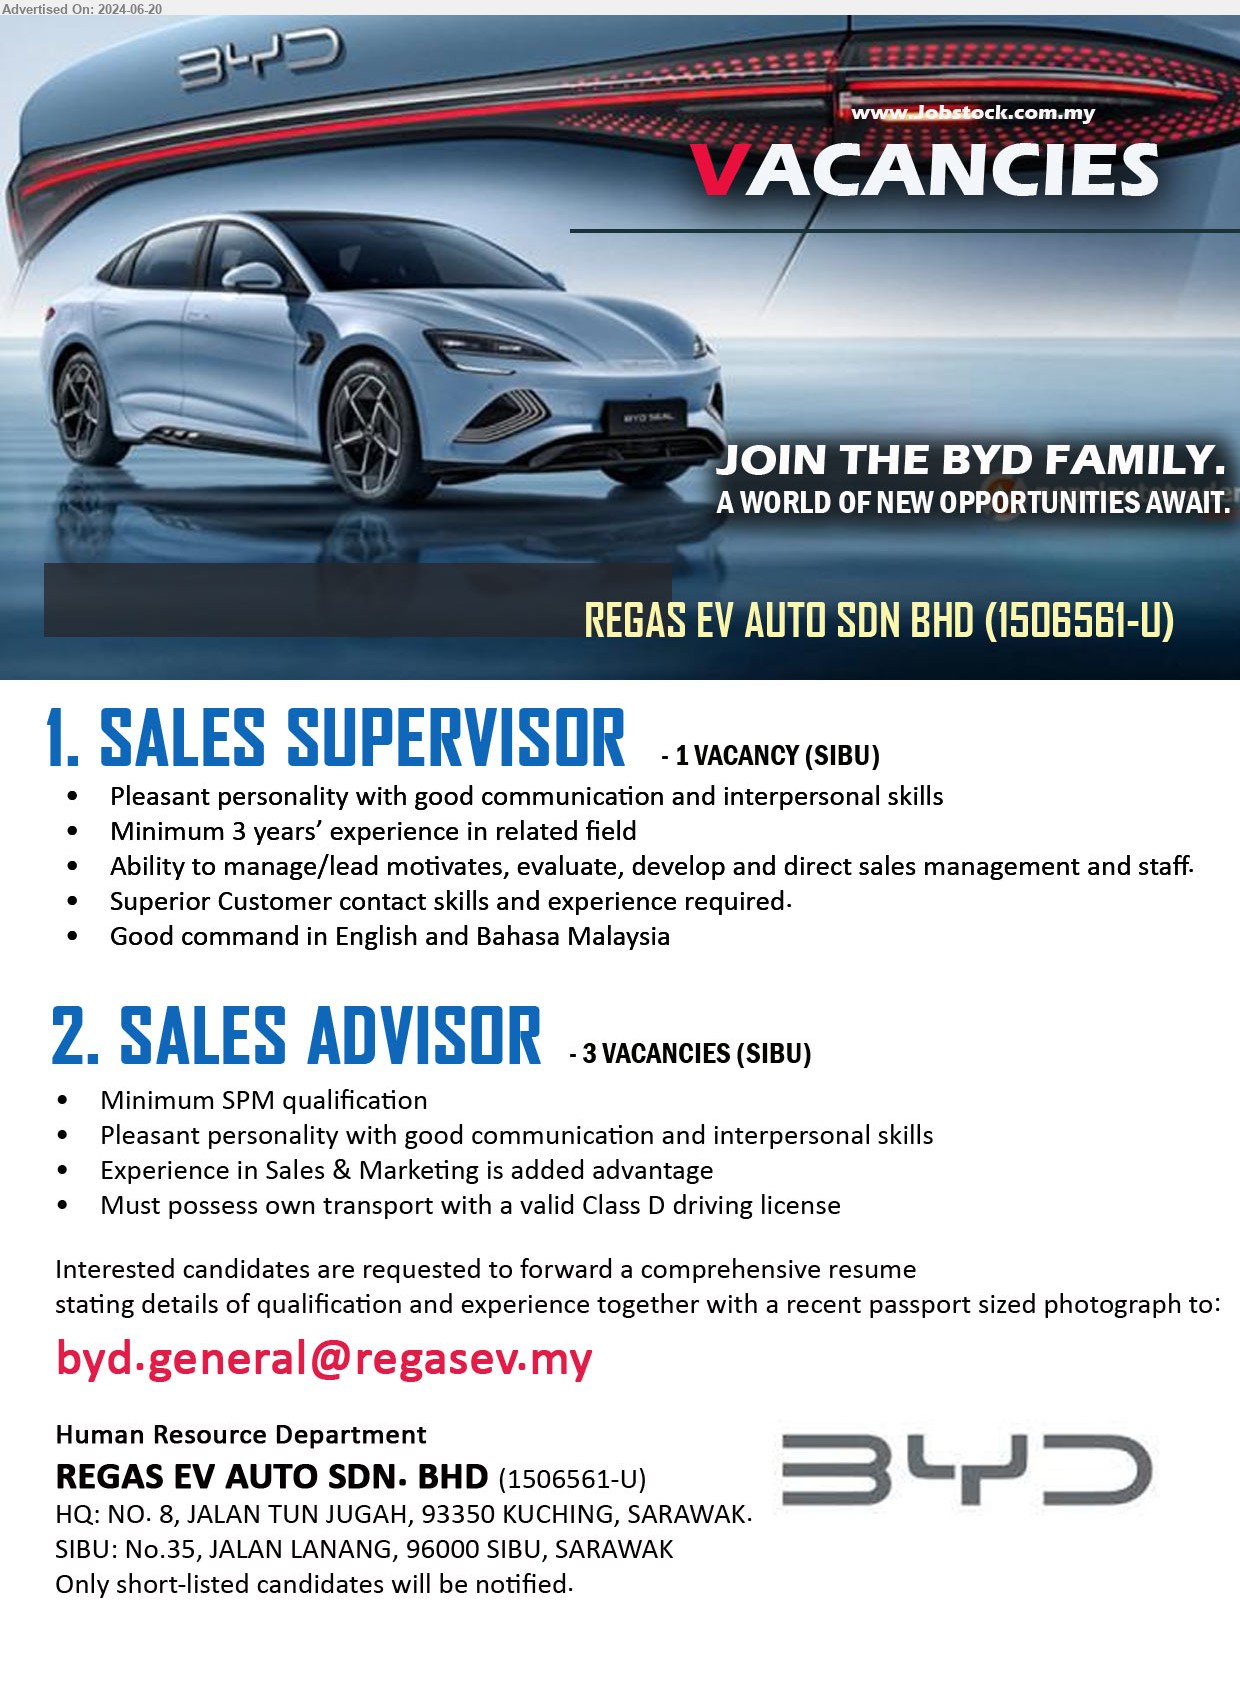 REGAS EV AUTO SDN BHD - 1. SALES SUPERVISOR (Sibu), Minimum 3 years’ experience in related field, Ability to manage/lead motivates, evaluate, develop and direct sales management and staff.,...
2. SALES ADVISOR  (Sibu), 3 posts, Experience in Sales & Marketing is added advantage,...
Email resume to ...